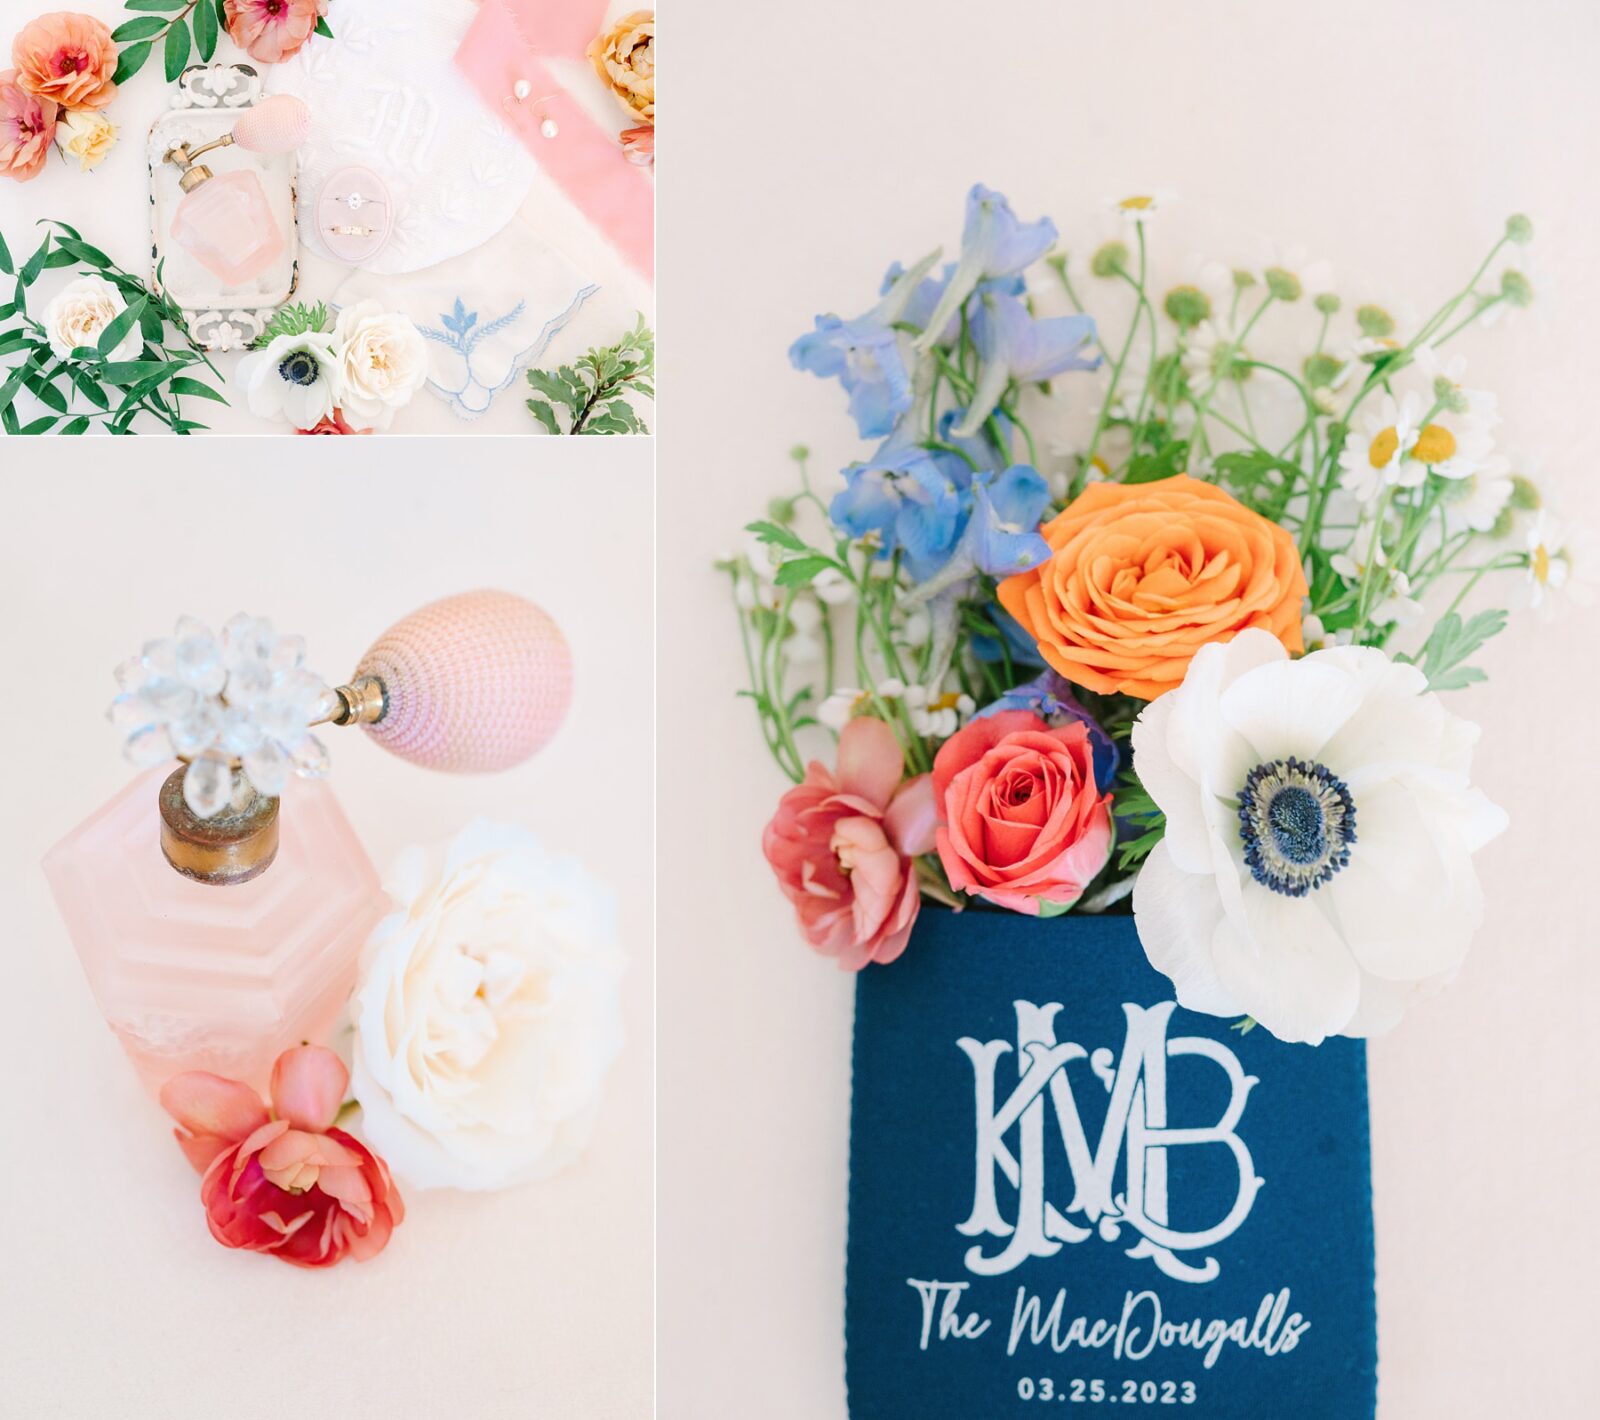 perfume wedding details, antique perfume bottle, wedding koozie, wedding koozie with flowers in it, wedding flat lay with florals, wedding at the videre, photos by Tara Lyons Photography, Perry's Petal, lauren quesada, signed sealed, 